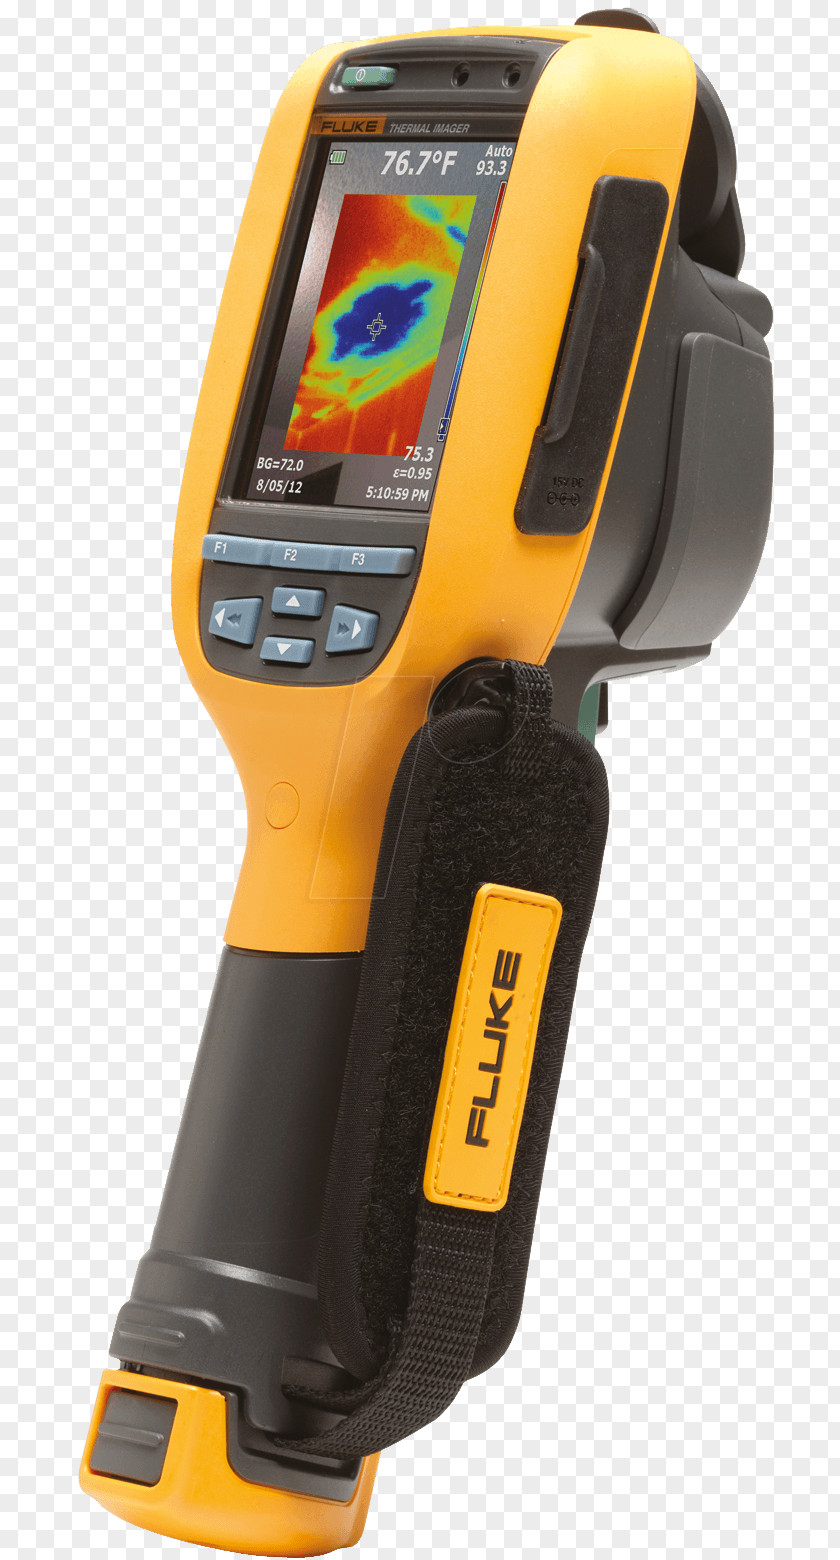 Camera Thermographic Thermography Thermal Imaging Fluke Corporation PNG